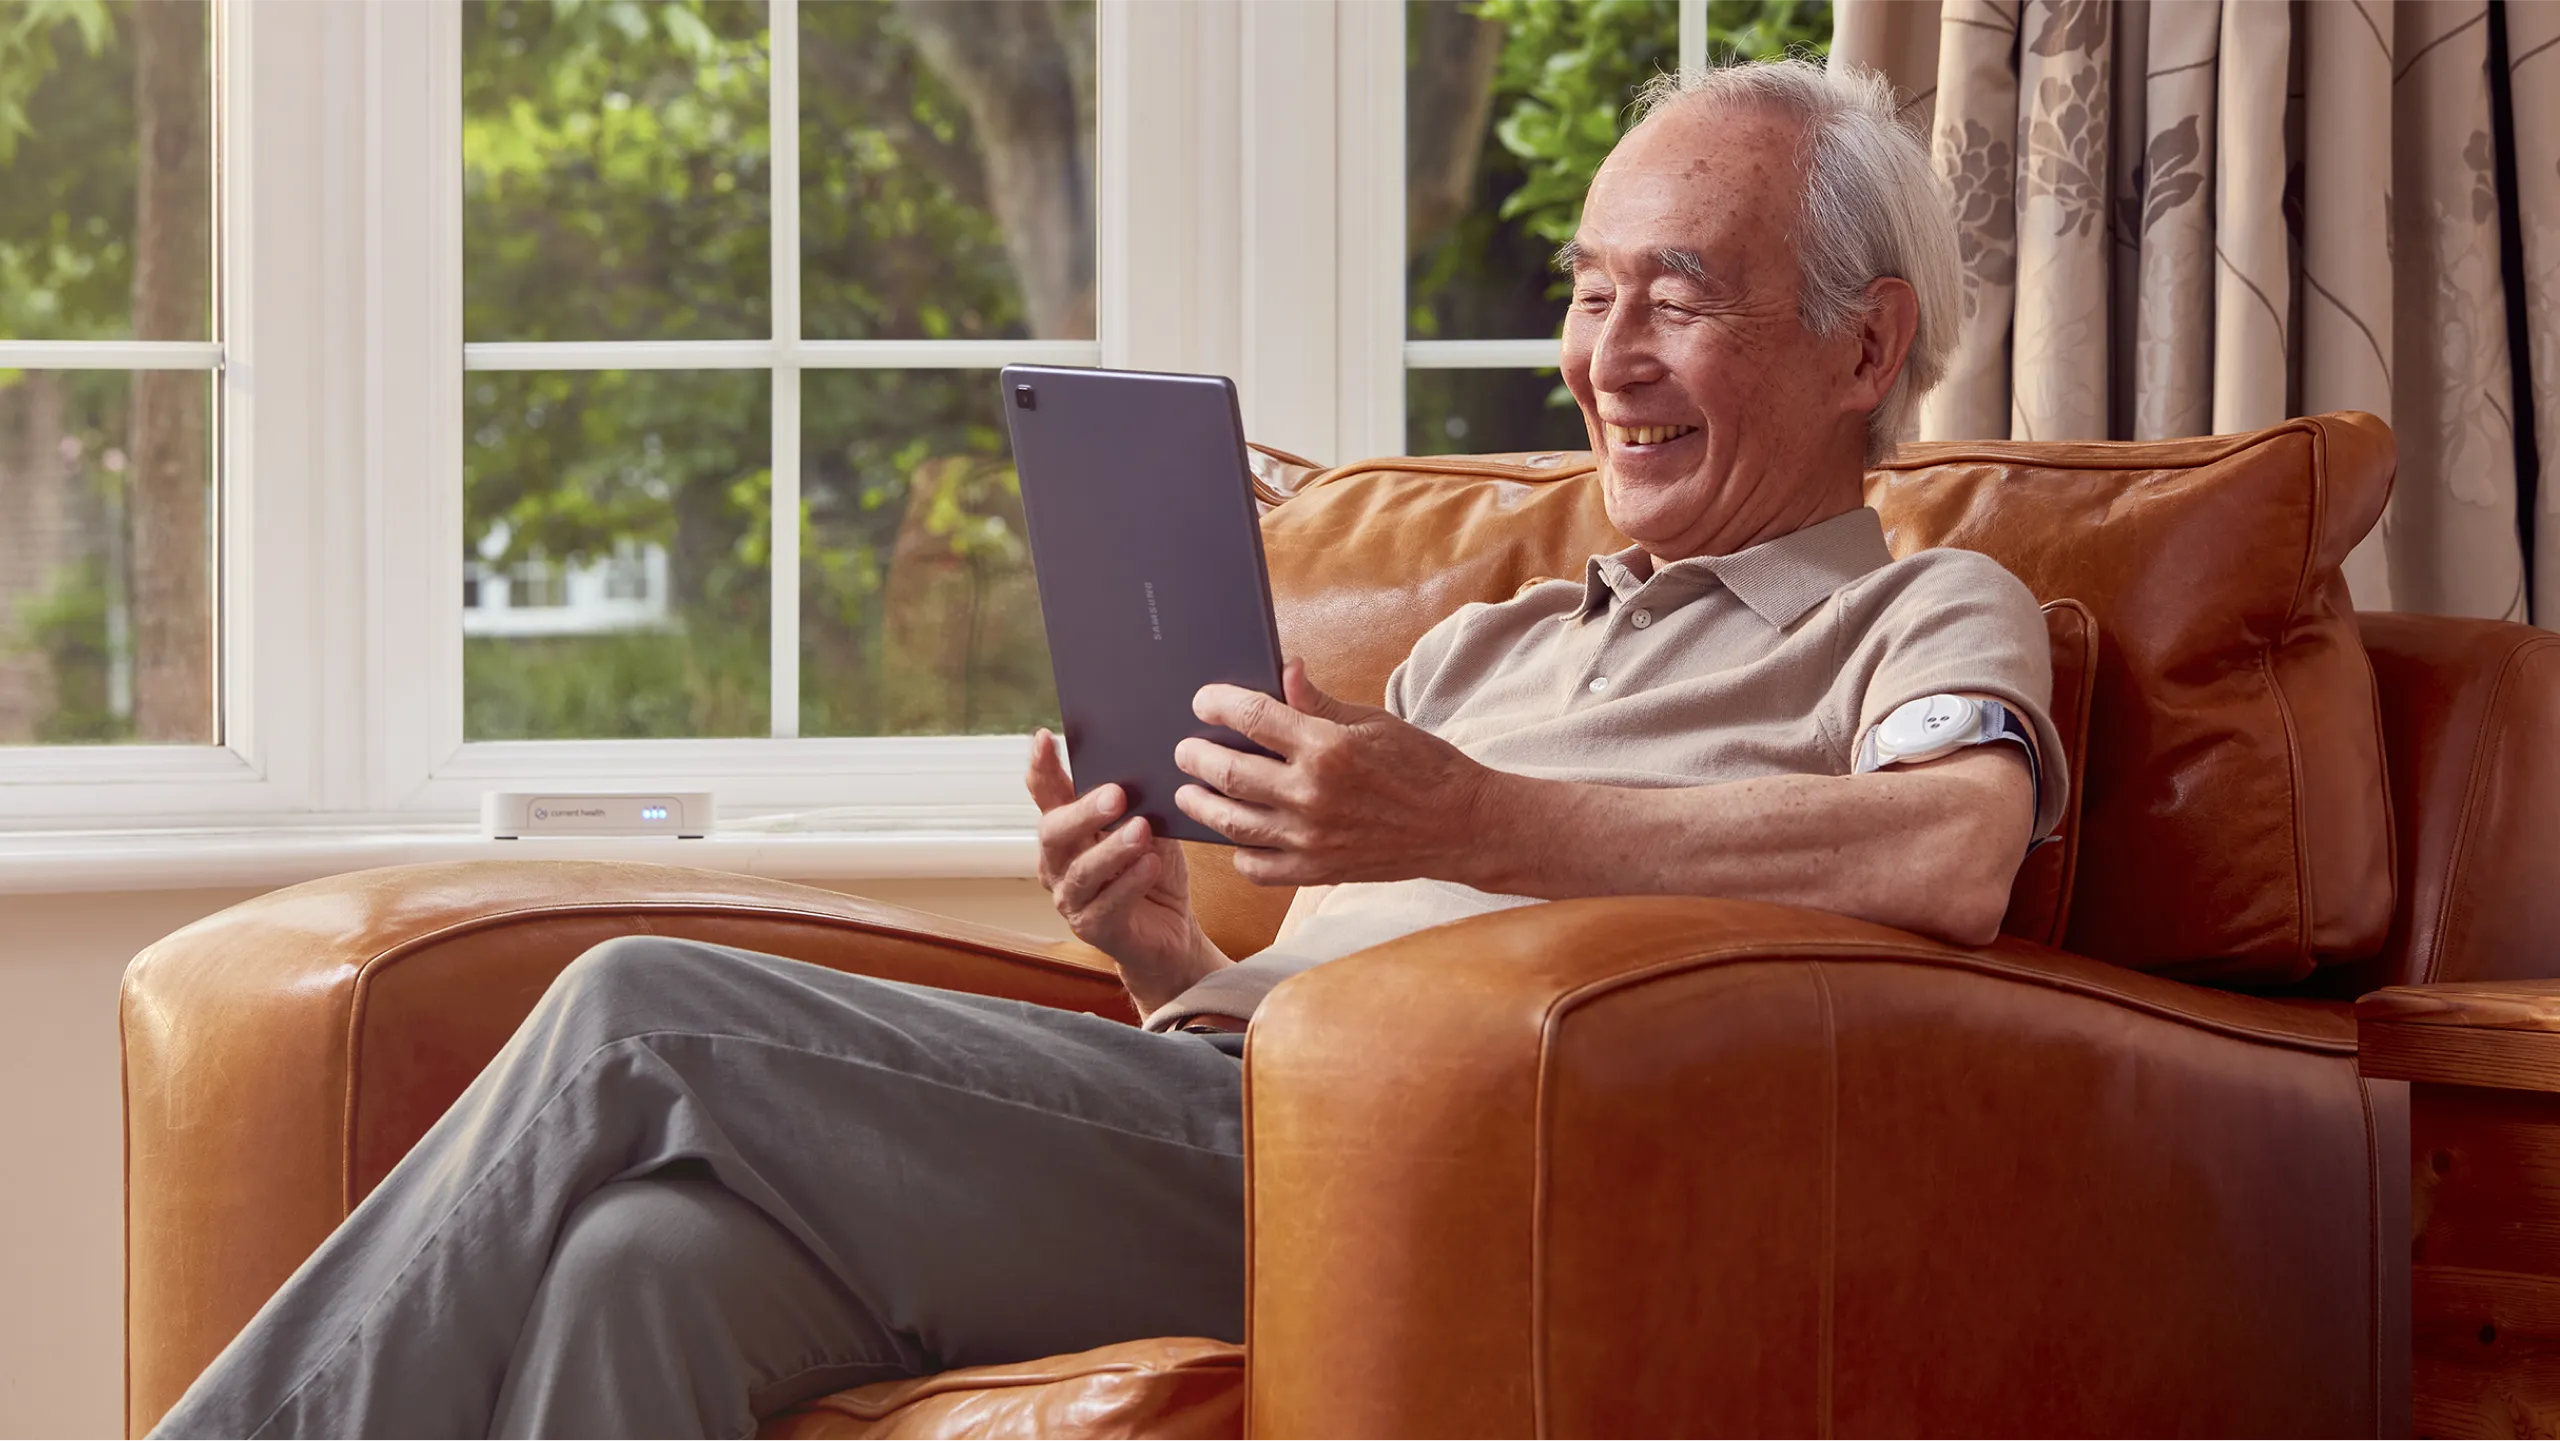 An smiling elderly man wears a Current Health Continuous Vital Sign Monitor on his arm, while  looking at his tablet.